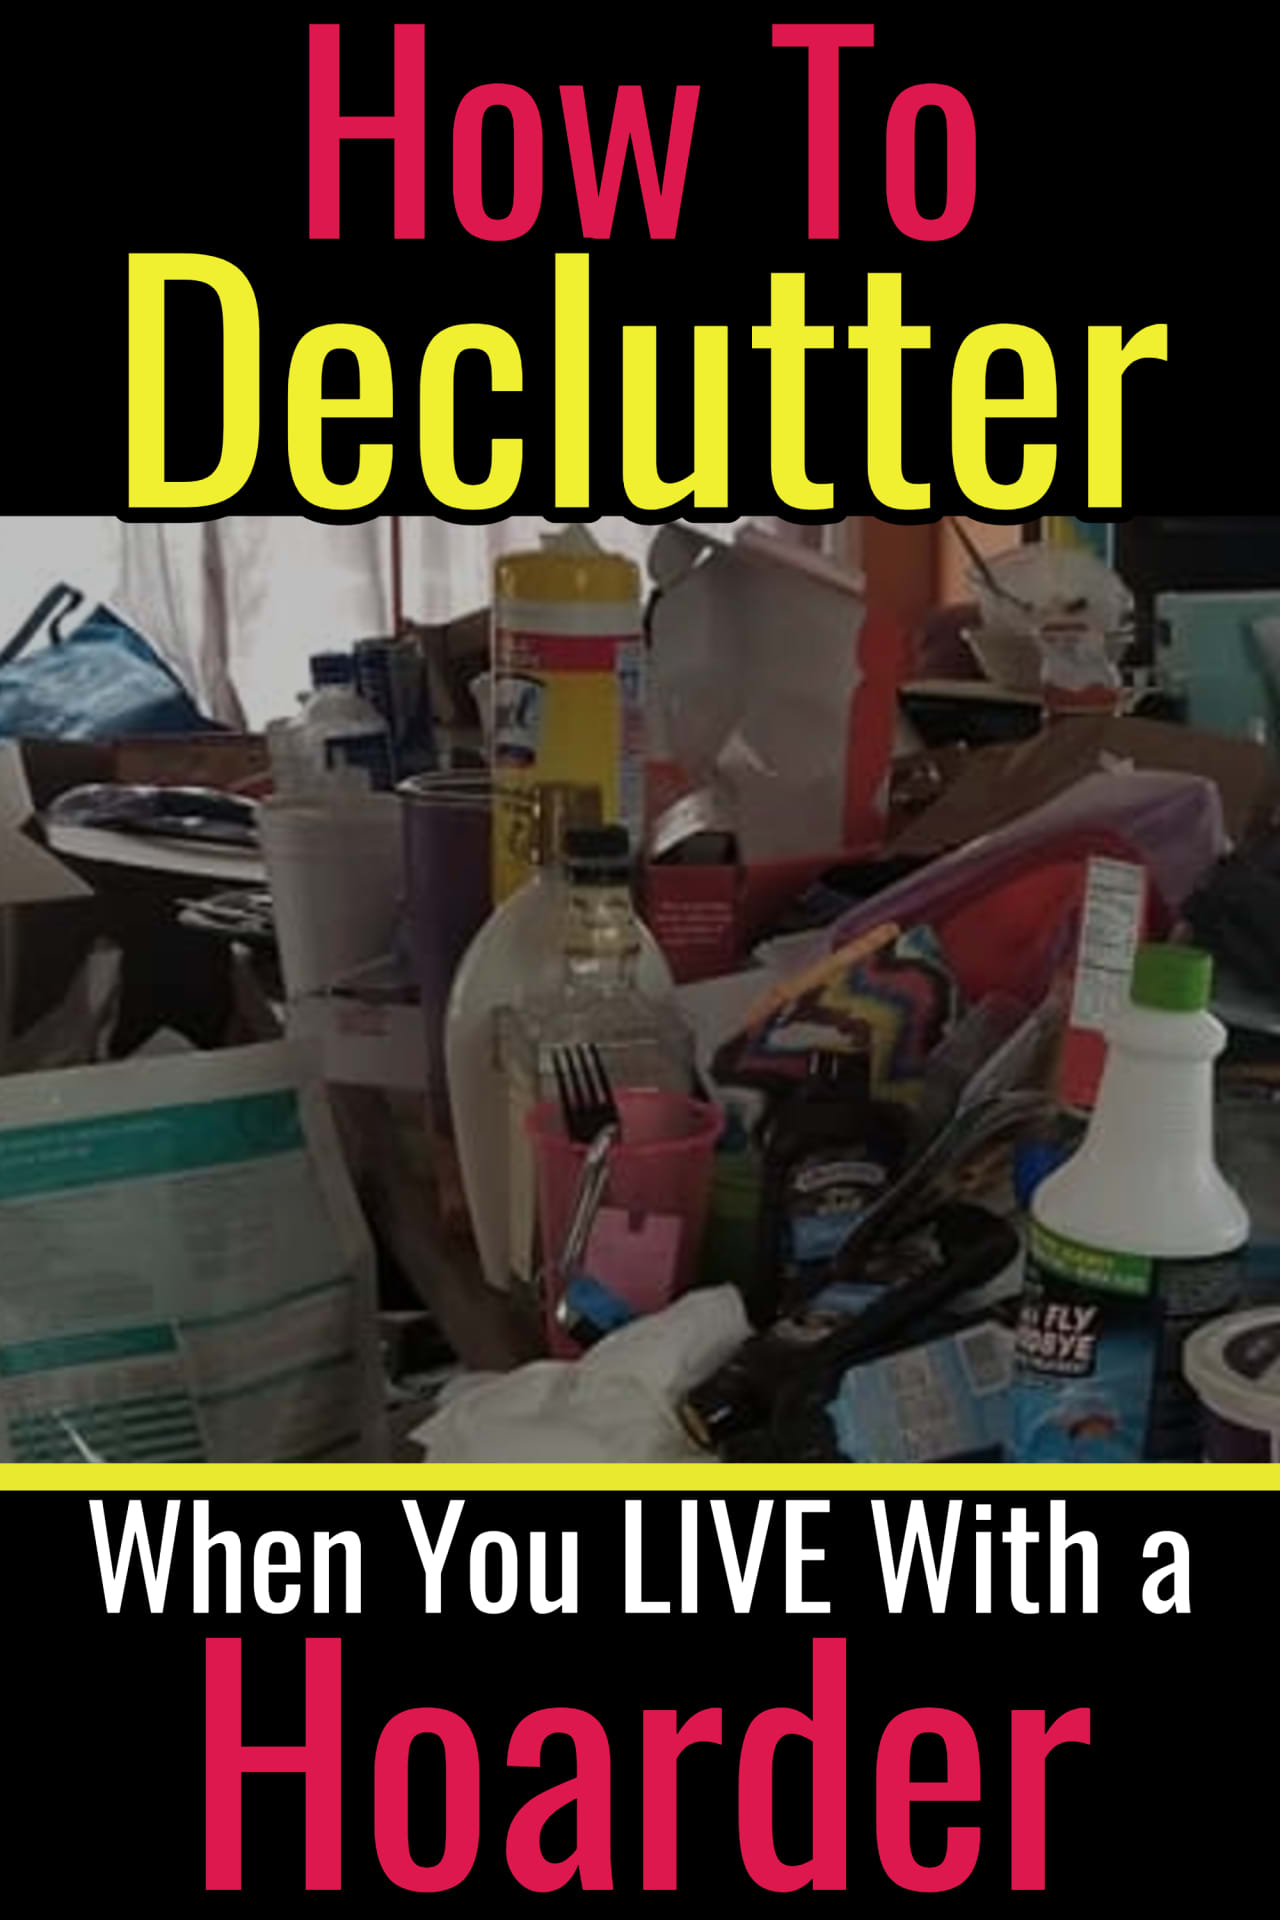 How To Declutter When You LIVE With a Hoarder -  Helping a hoarder declutter is SO much different than helping a pack rat get organized. Cleaning and organizing for hoarders is OVERWHELMING on many levels - these decluttering ideas help.  Here's our best tips to know how to help a hoarders declutter when you LIVE with the hoarder.